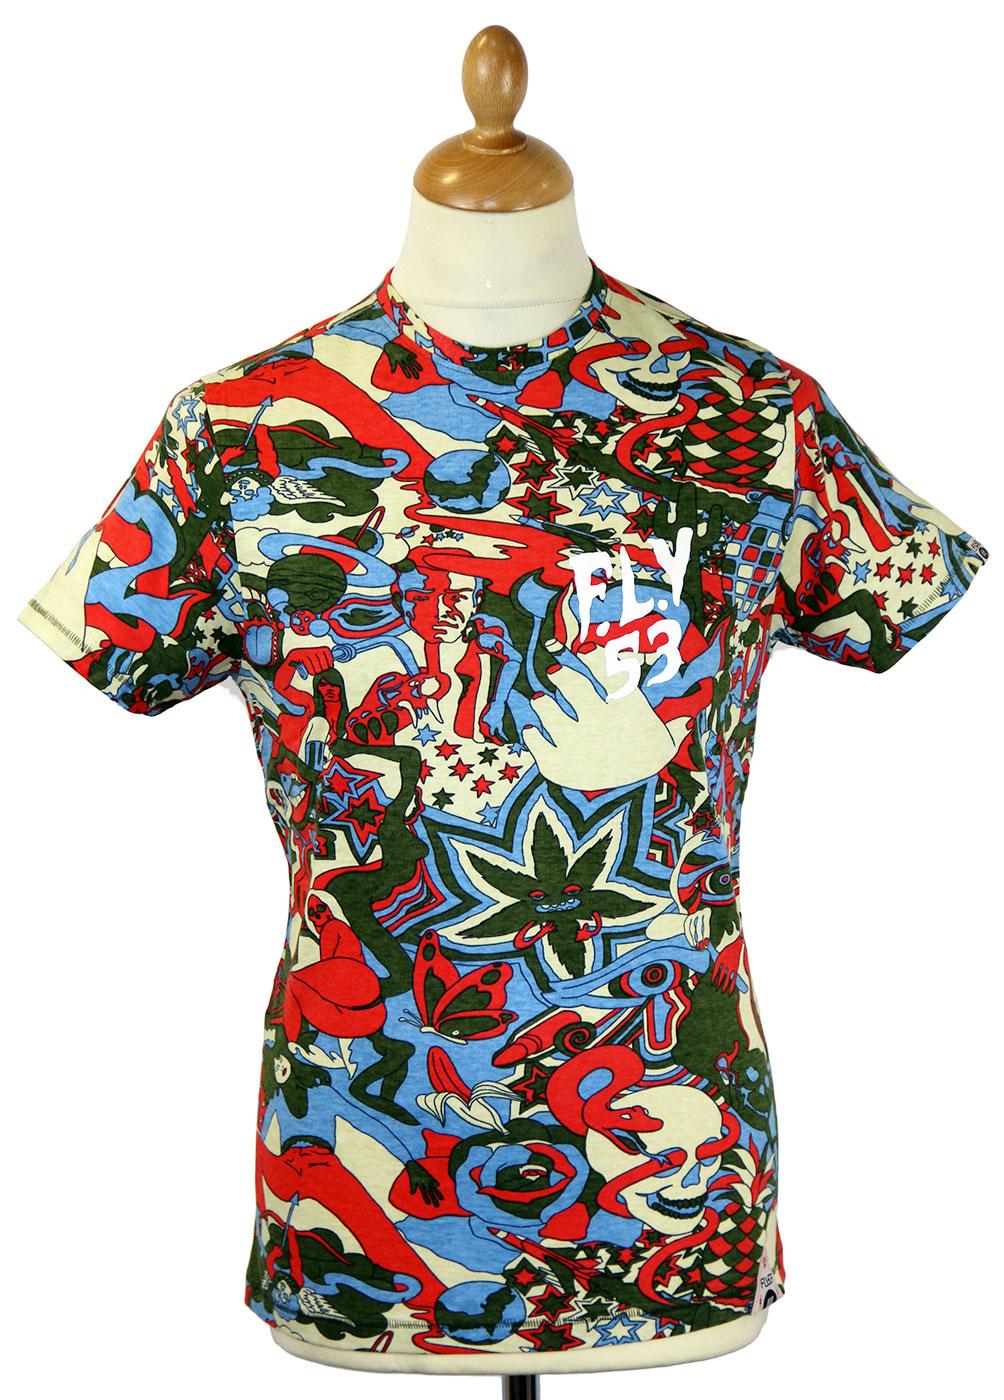 FLY53 Wolfe Retro 60s Psychedelic Graphic Print T-shirt Ecru